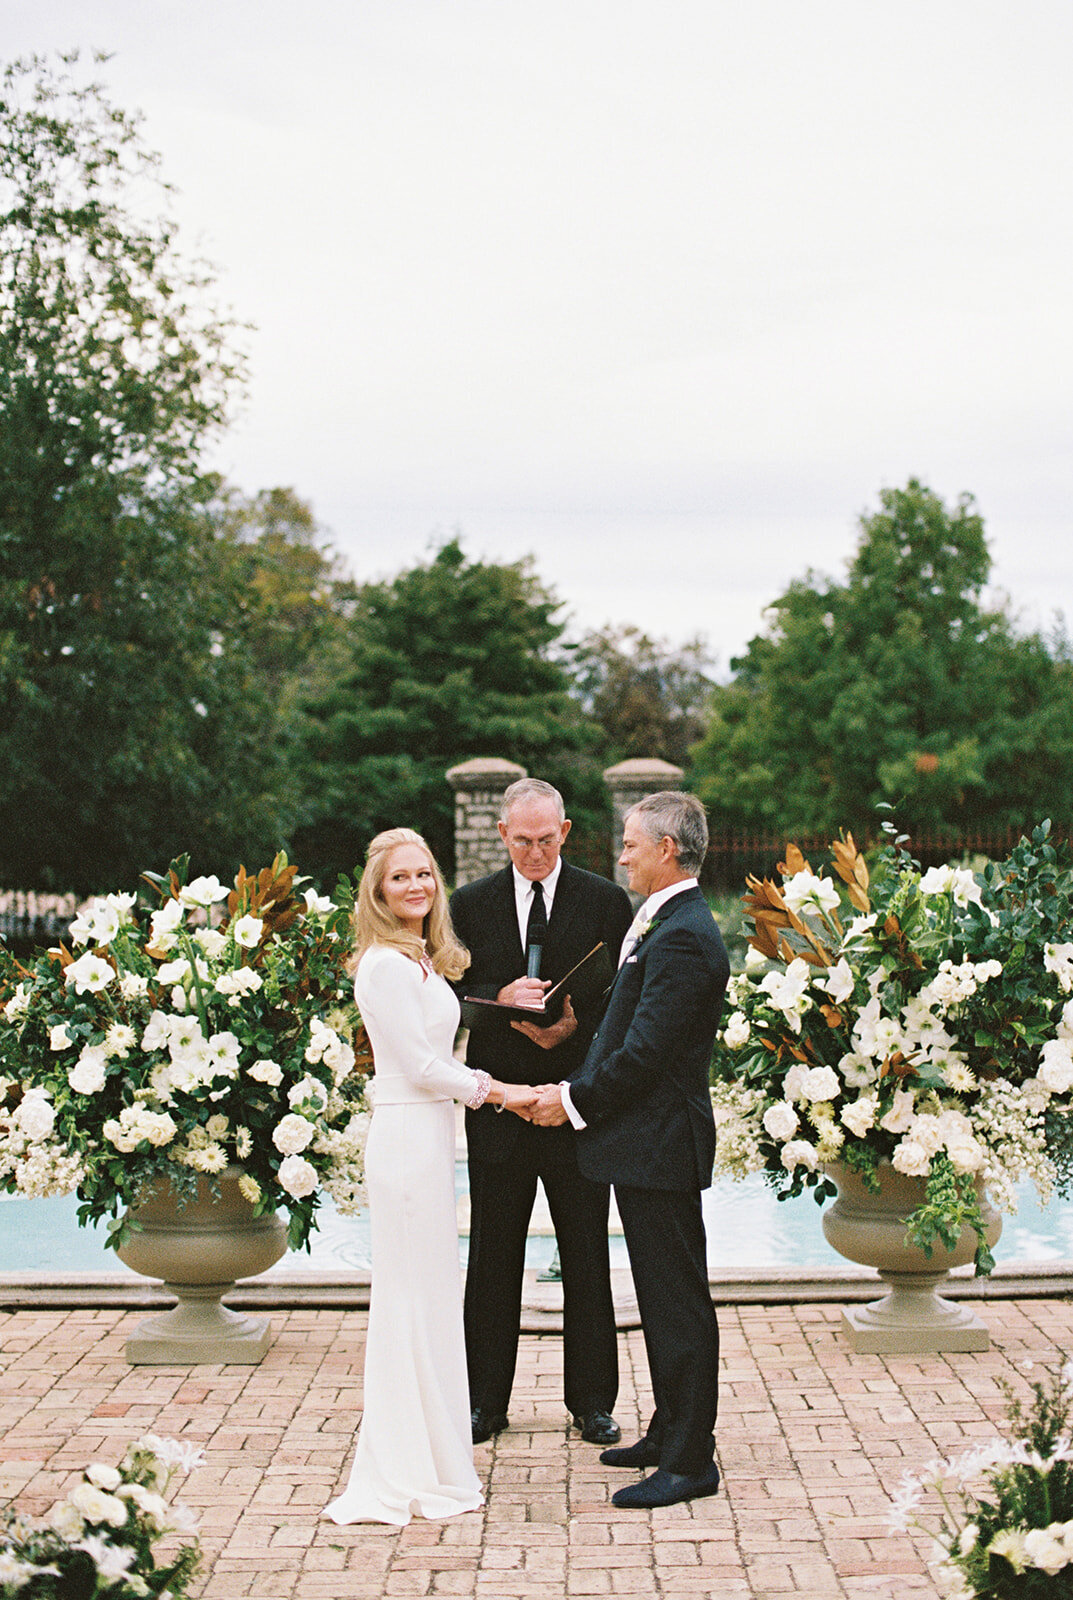 austin-wedding-commodore-perry-estate-julie-wilhite-photography-8